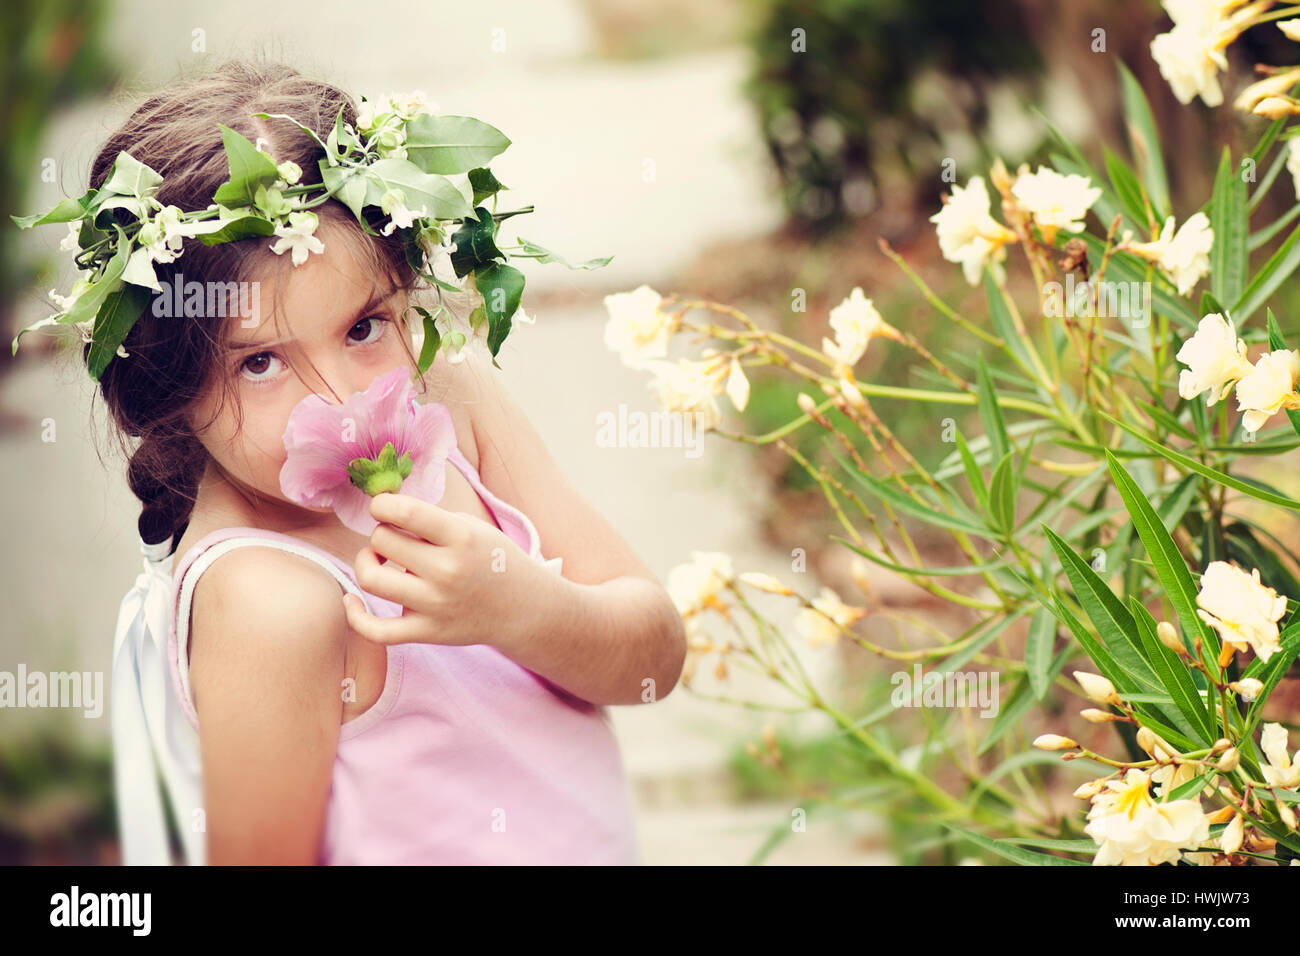 Little girl with flower crown smelling flower Stock Photo